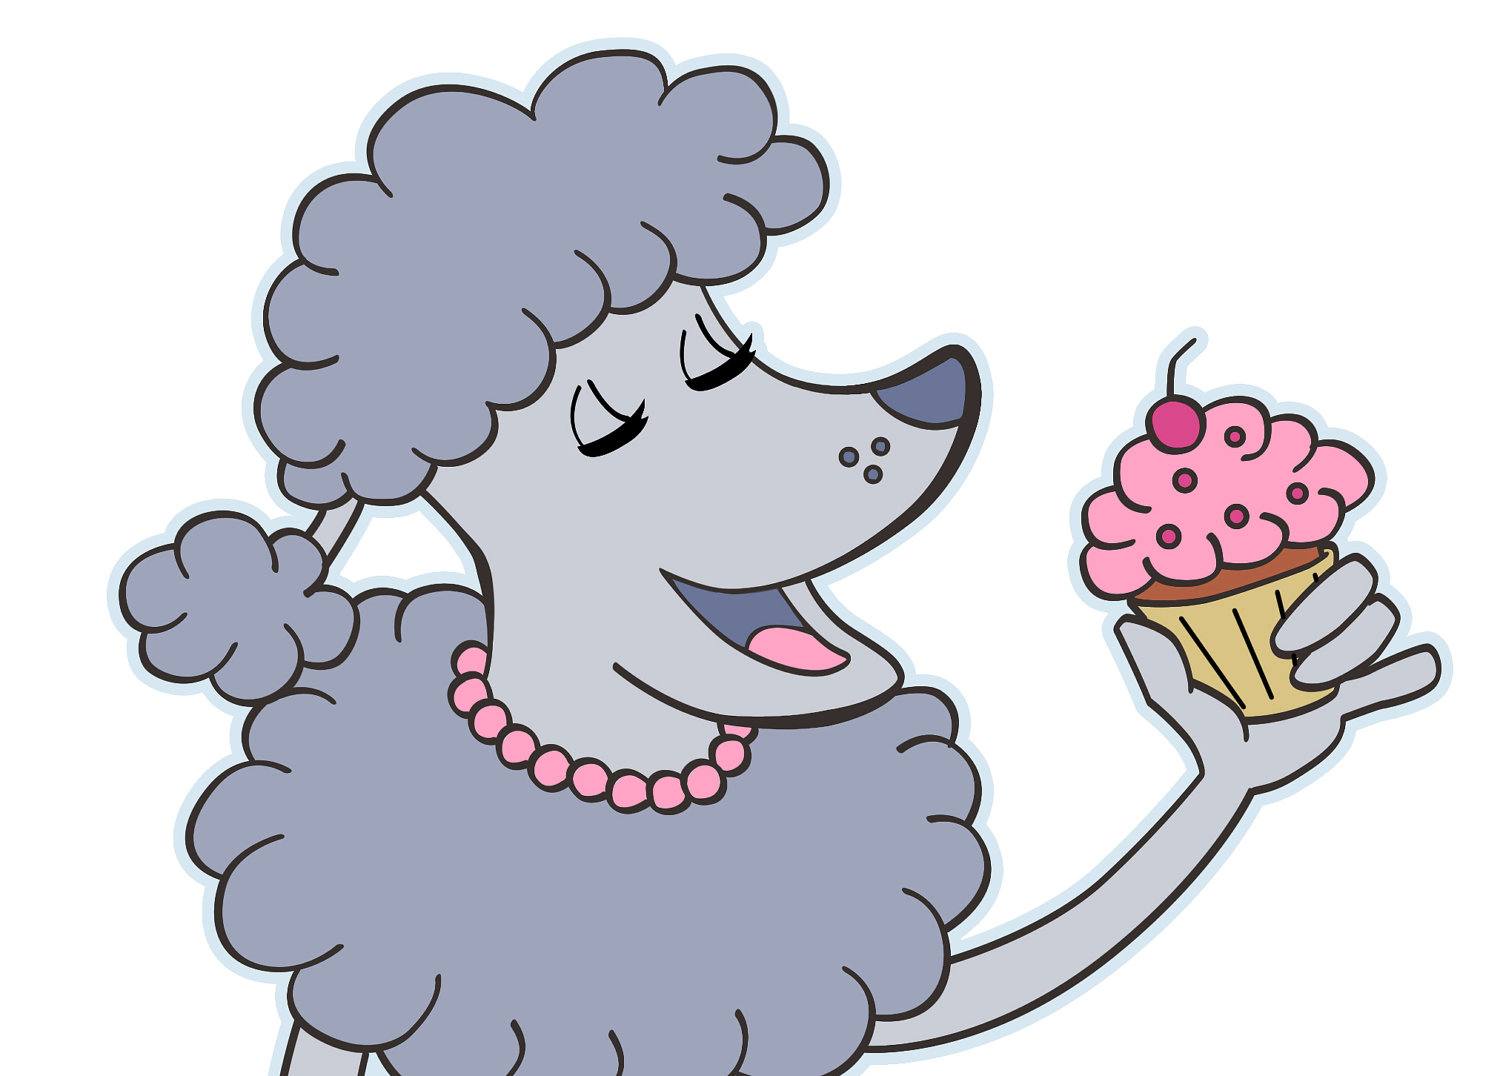 Cute Cartoon Poodle Eating a Cupcake Clip Art by Nyrak on Etsy